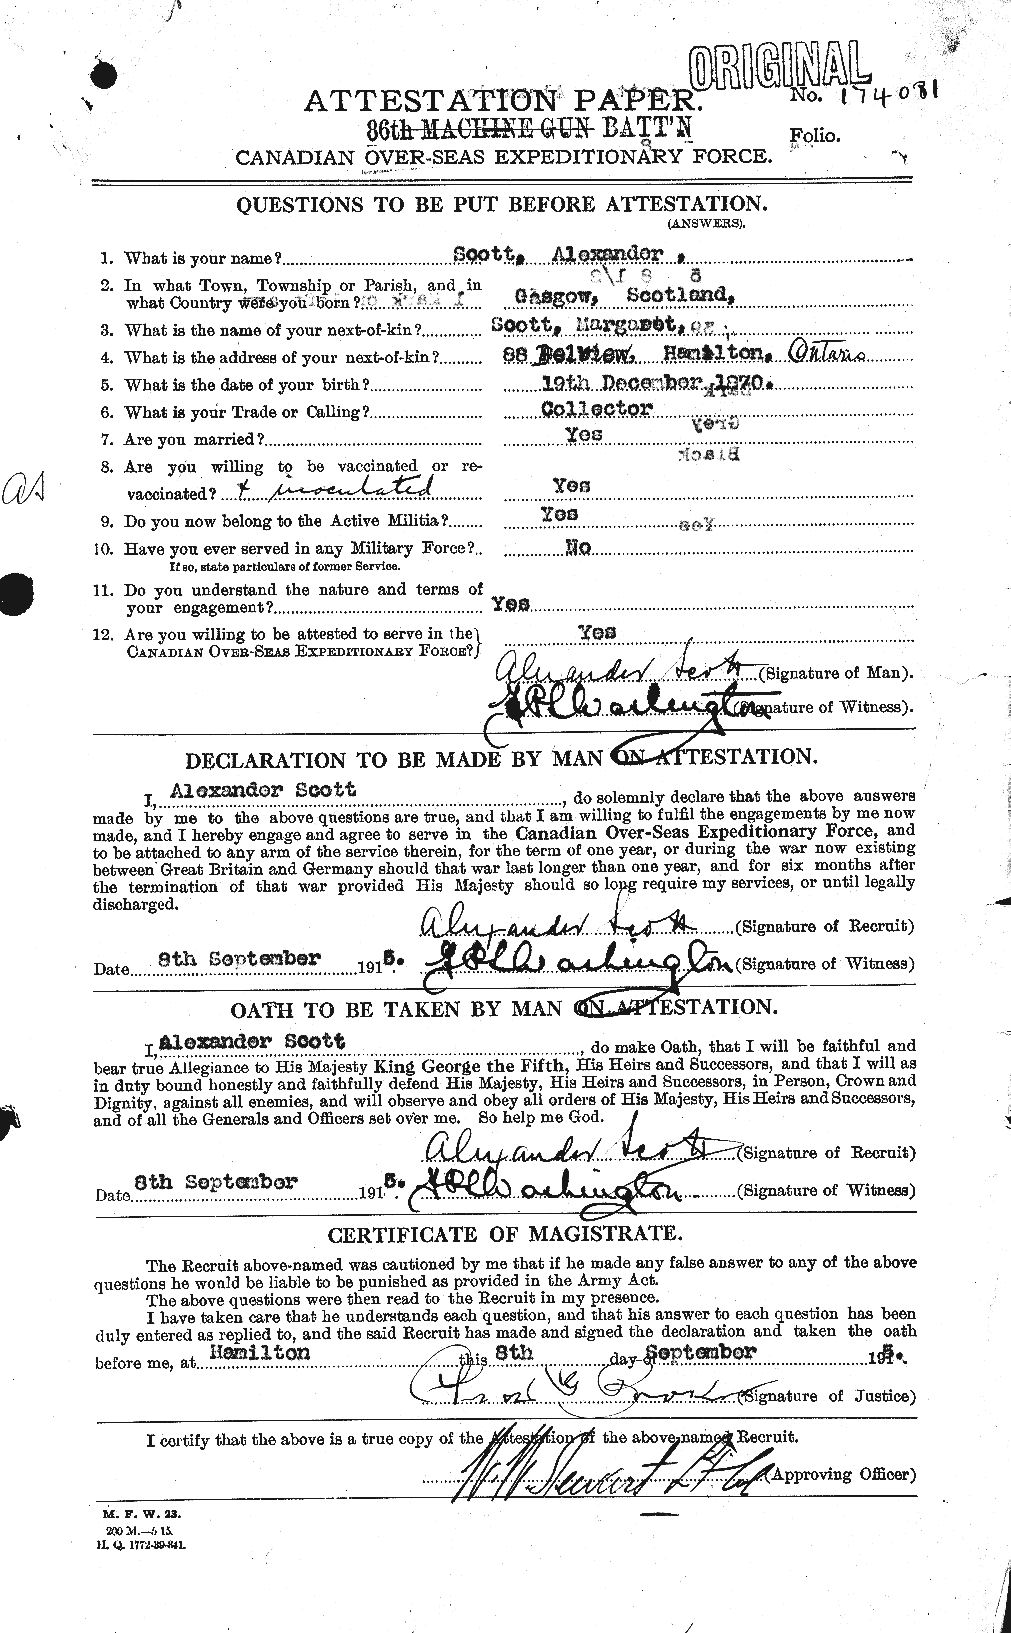 Personnel Records of the First World War - CEF 086607a